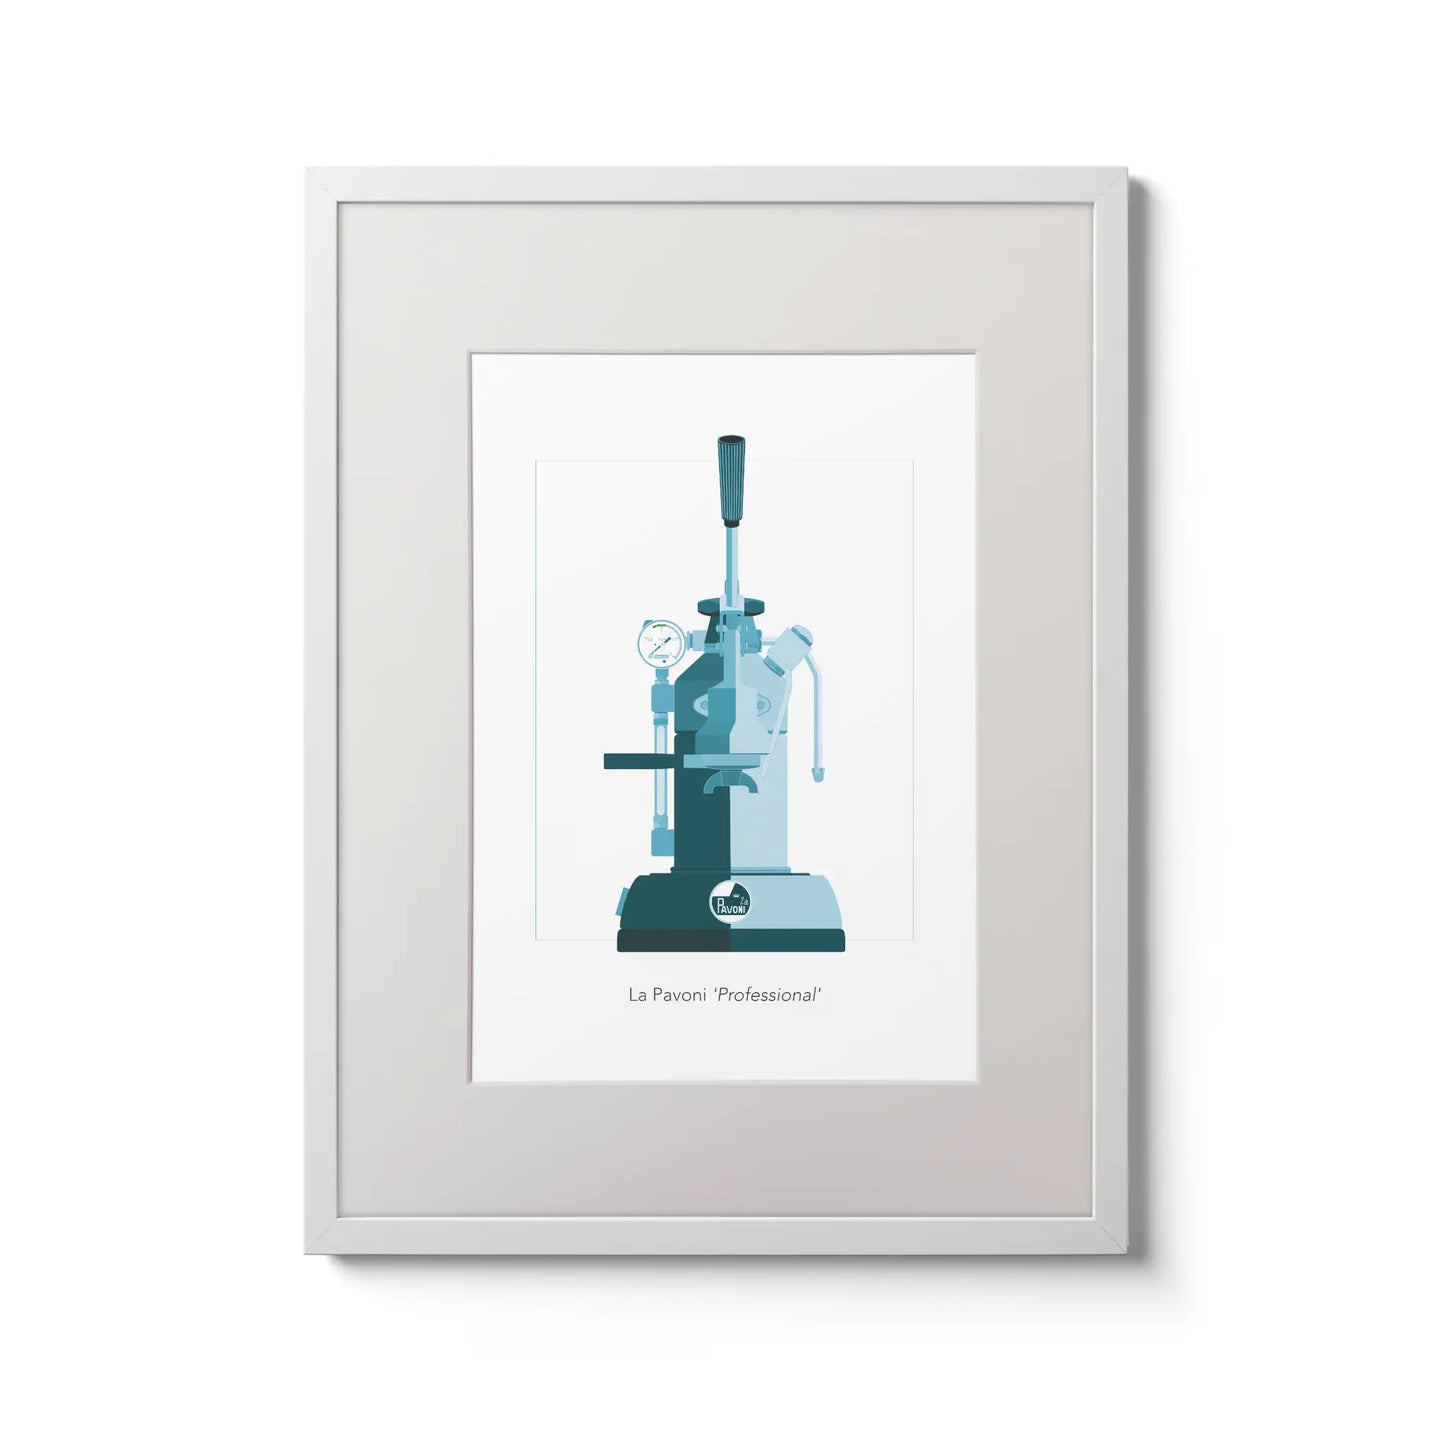 Illustration of a La Pavoni lever coffee machine, front view in aqua blue,  framed.